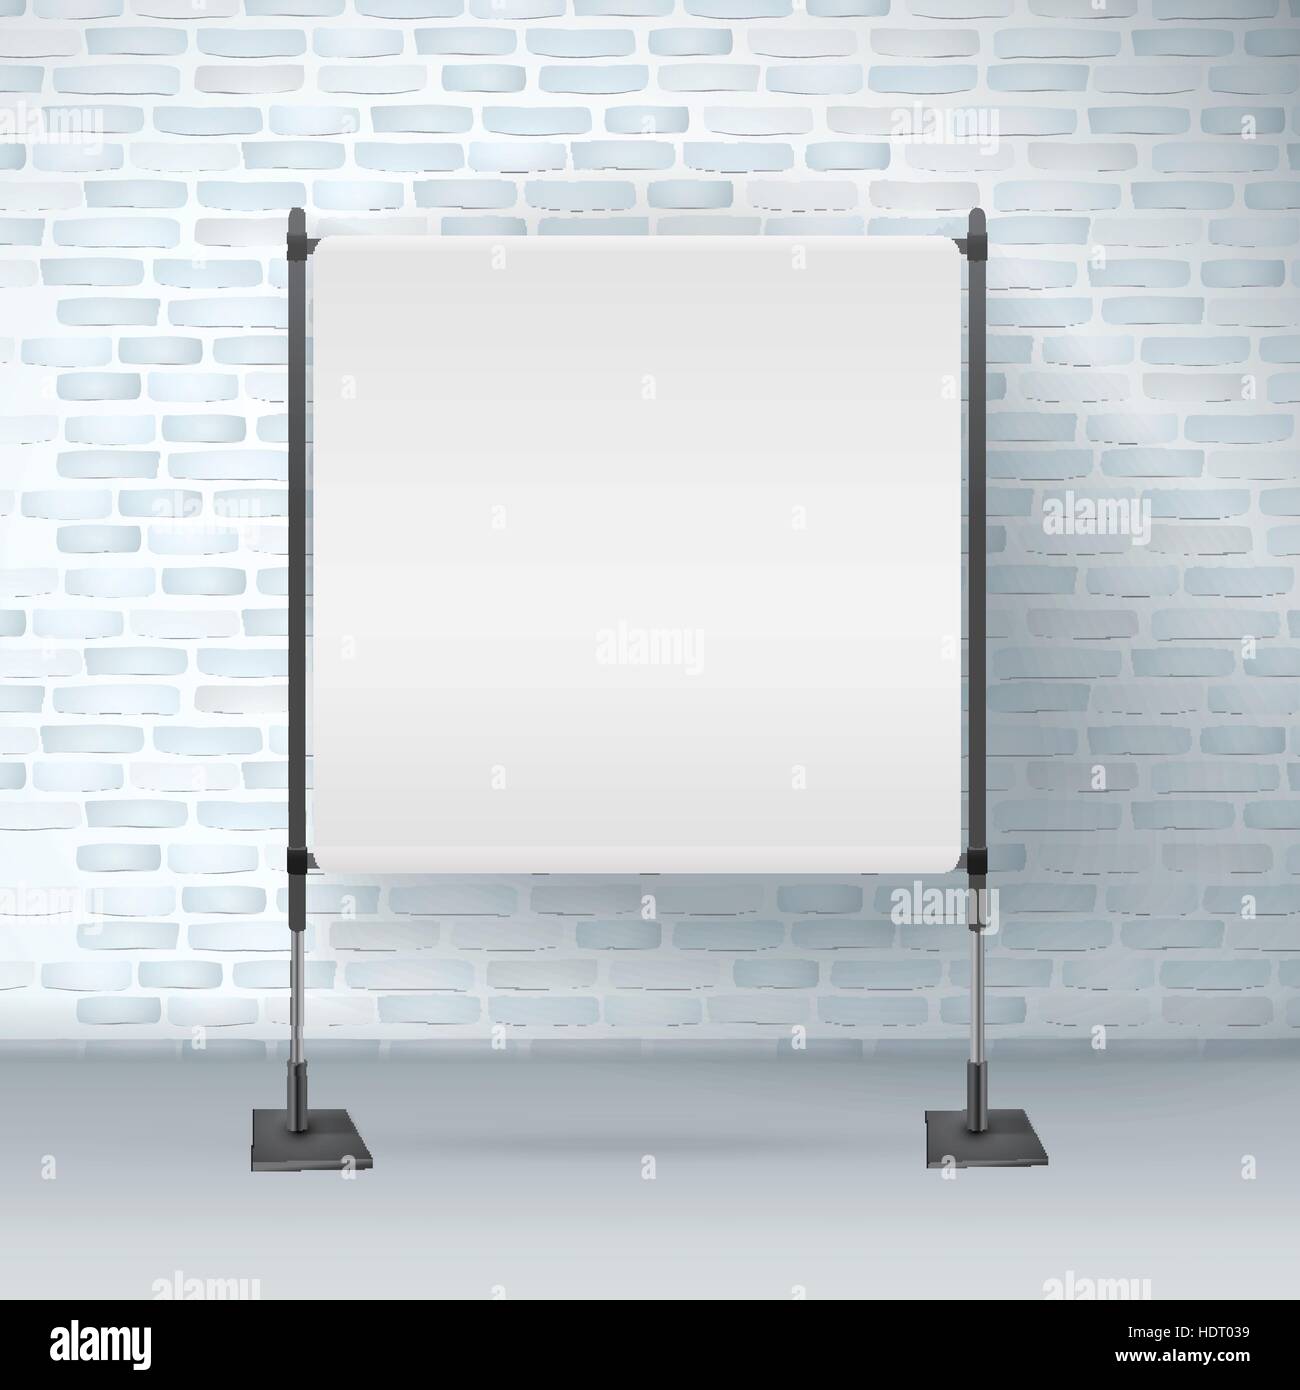 blank projector screen isolated on brick wall Stock Vector